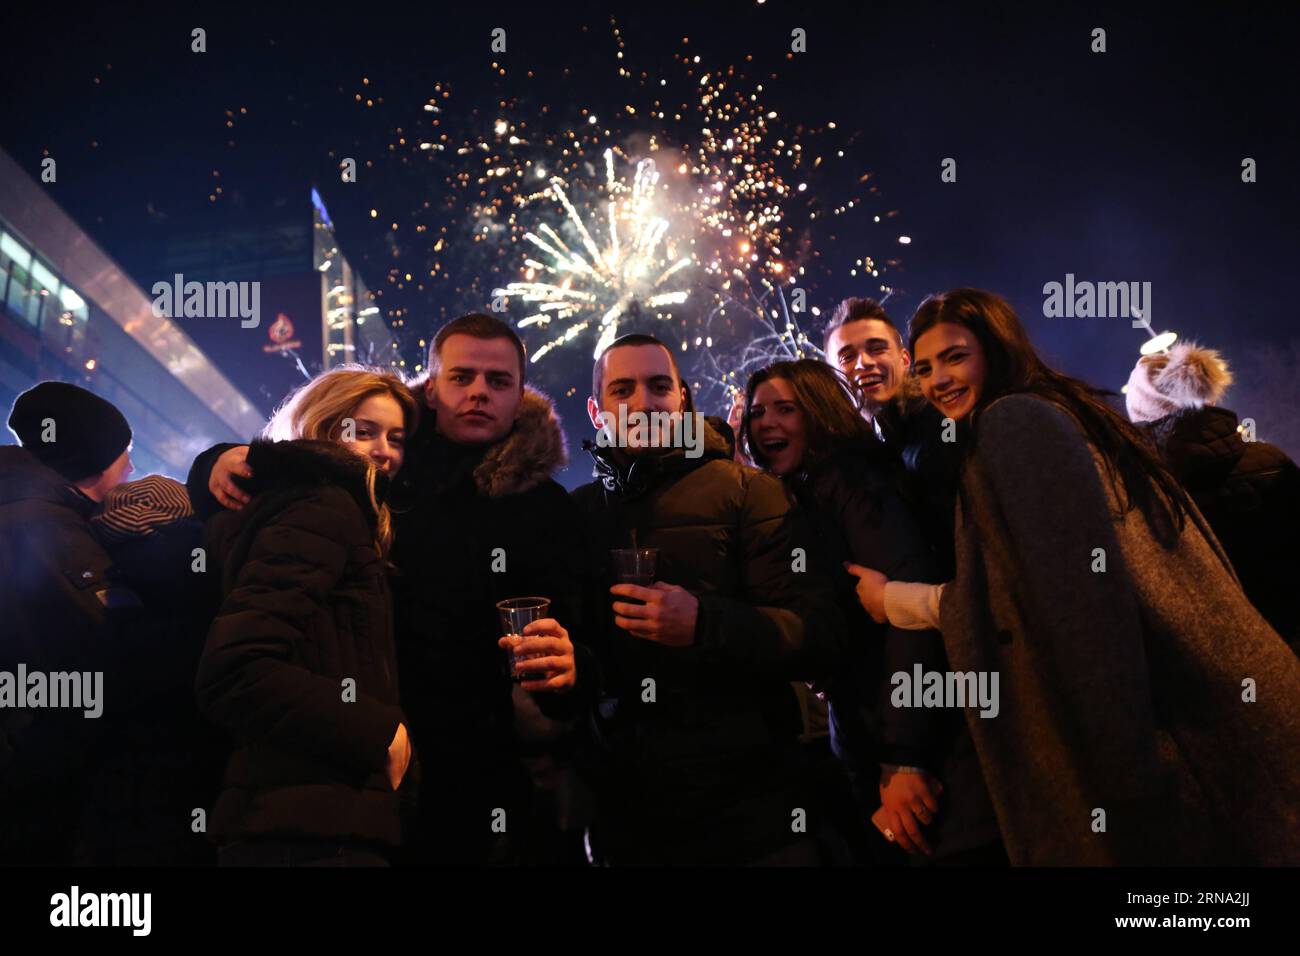 (160101) -- SARAJEVO, Jan. 1, 2016 -- People attend a concert to celebrate the New Year at the BBI Square in central Sarajevo, Bosnia-Herzegovina, Dec. 31, 2015. Sarajevo residents and tourists traditionally welcome the New Year on the streets of the city. ) BOSNIA AND HERZEGOVINA-SARAJEVO-NEW YEAR S EVE HarisxMemija PUBLICATIONxNOTxINxCHN   160101 Sarajevo Jan 1 2016 Celebrities attend a Concert to Celebrate The New Year AT The BBI Square in Central Sarajevo Bosnia Herzegovina DEC 31 2015 Sarajevo Residents and tourists traditionally Welcome The New Year ON The Streets of The City Bosnia and Stock Photo